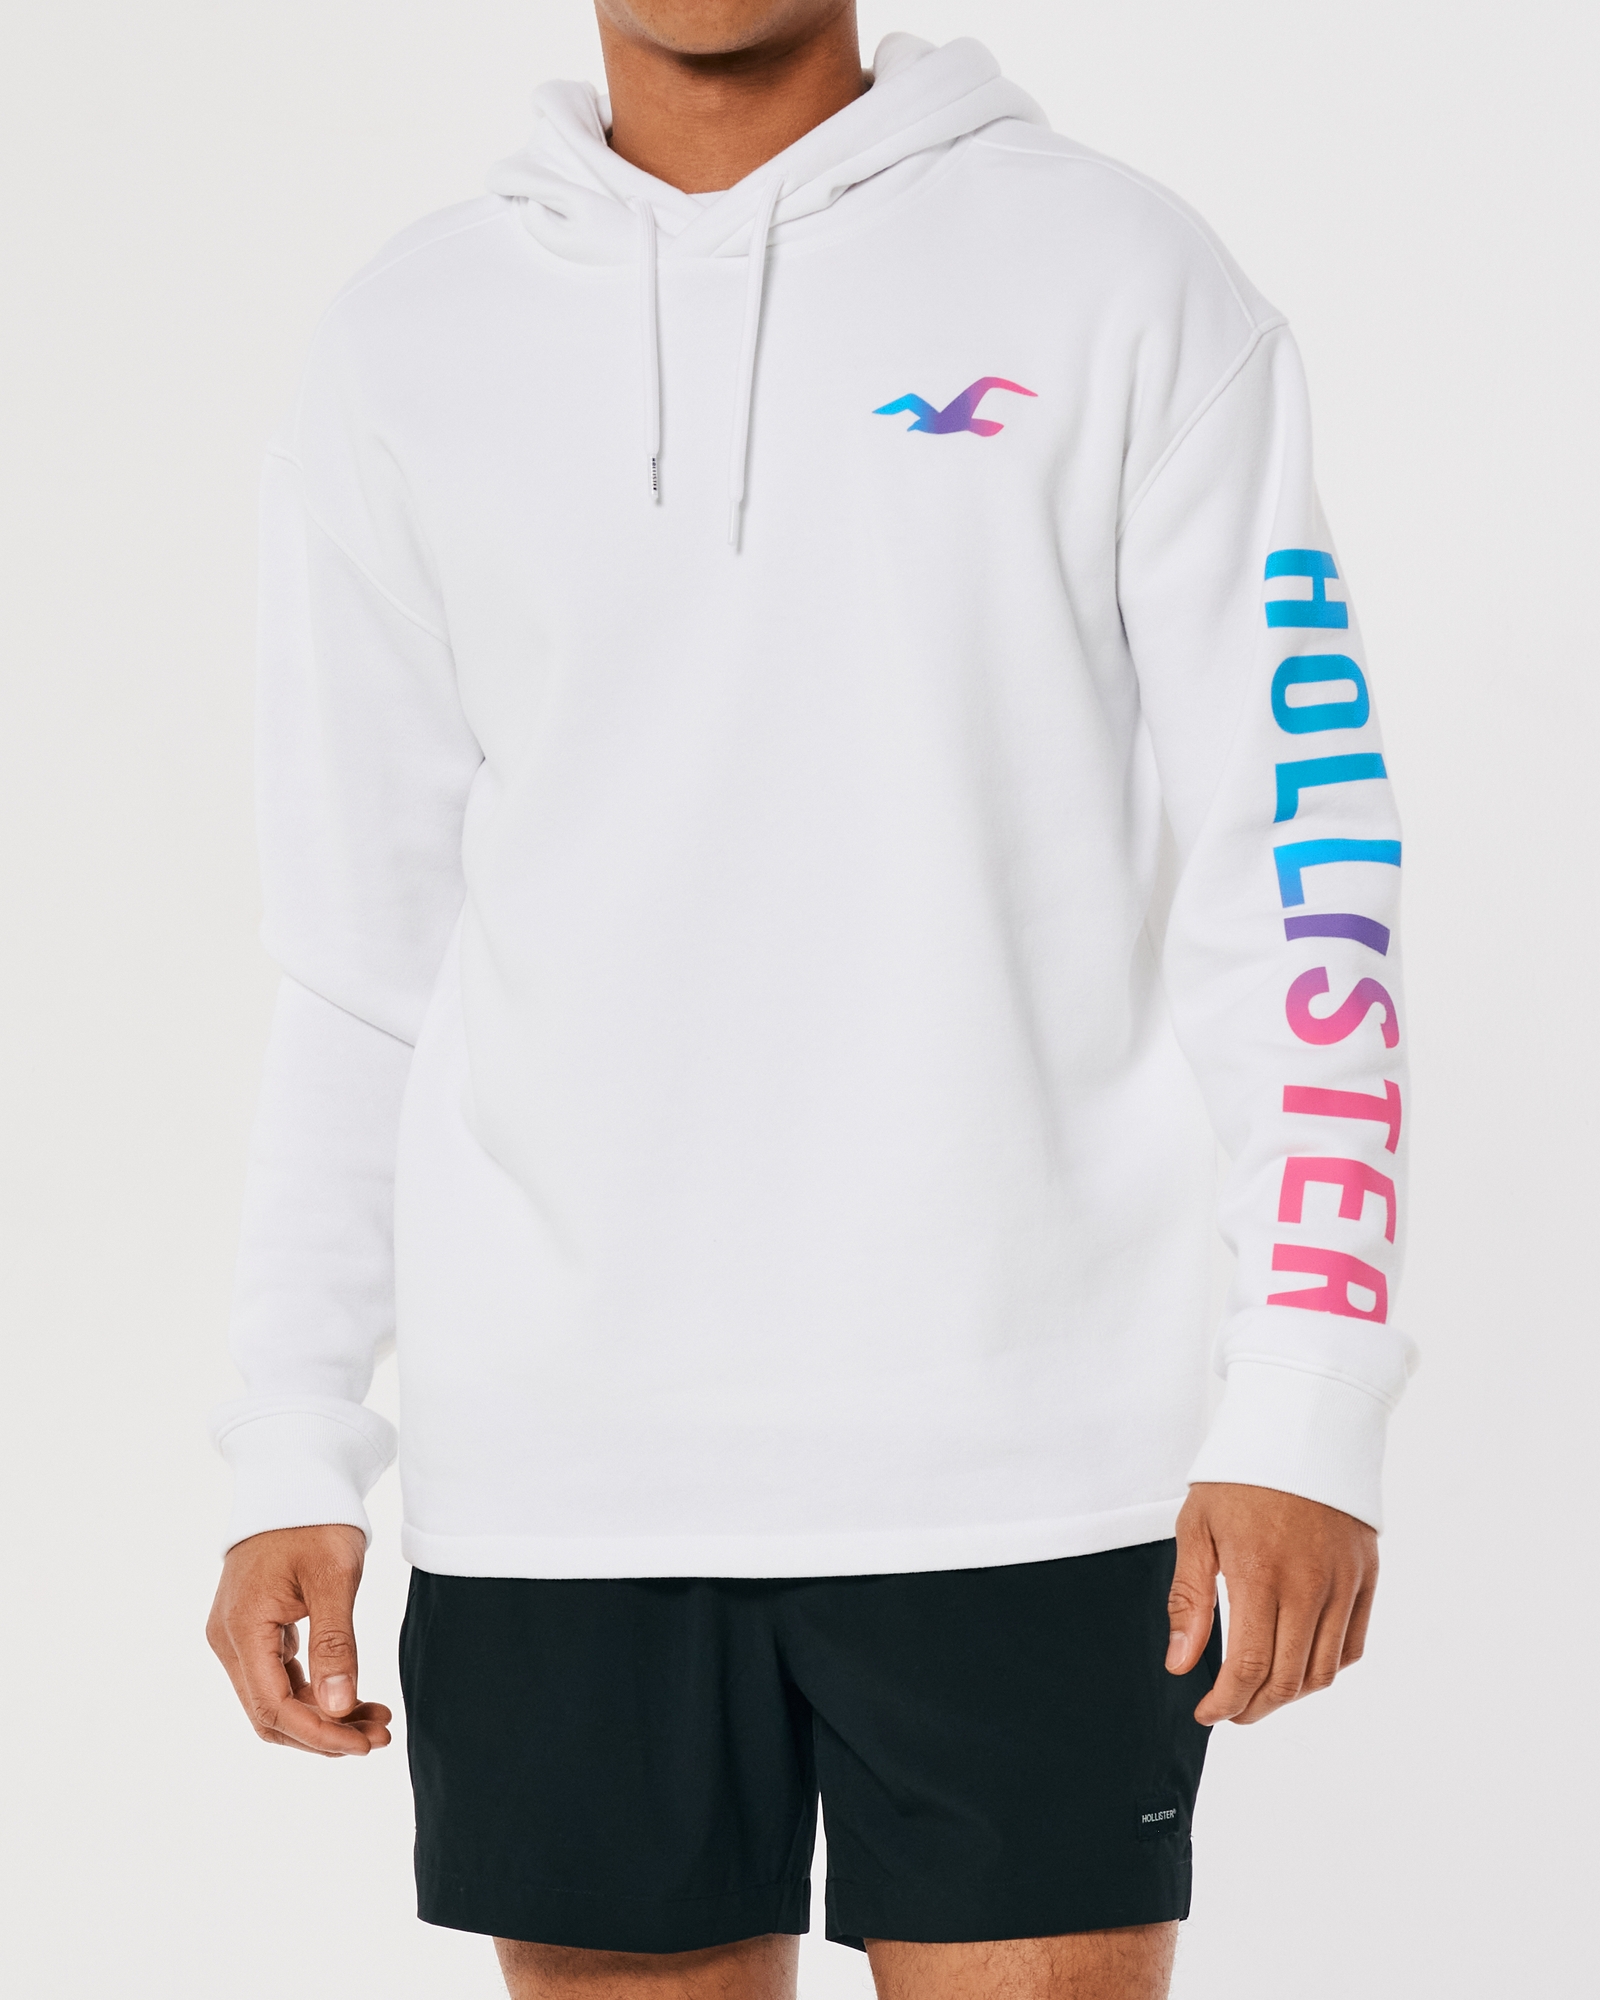 Men's Logo Graphic Hoodie in White Size S from Hollister